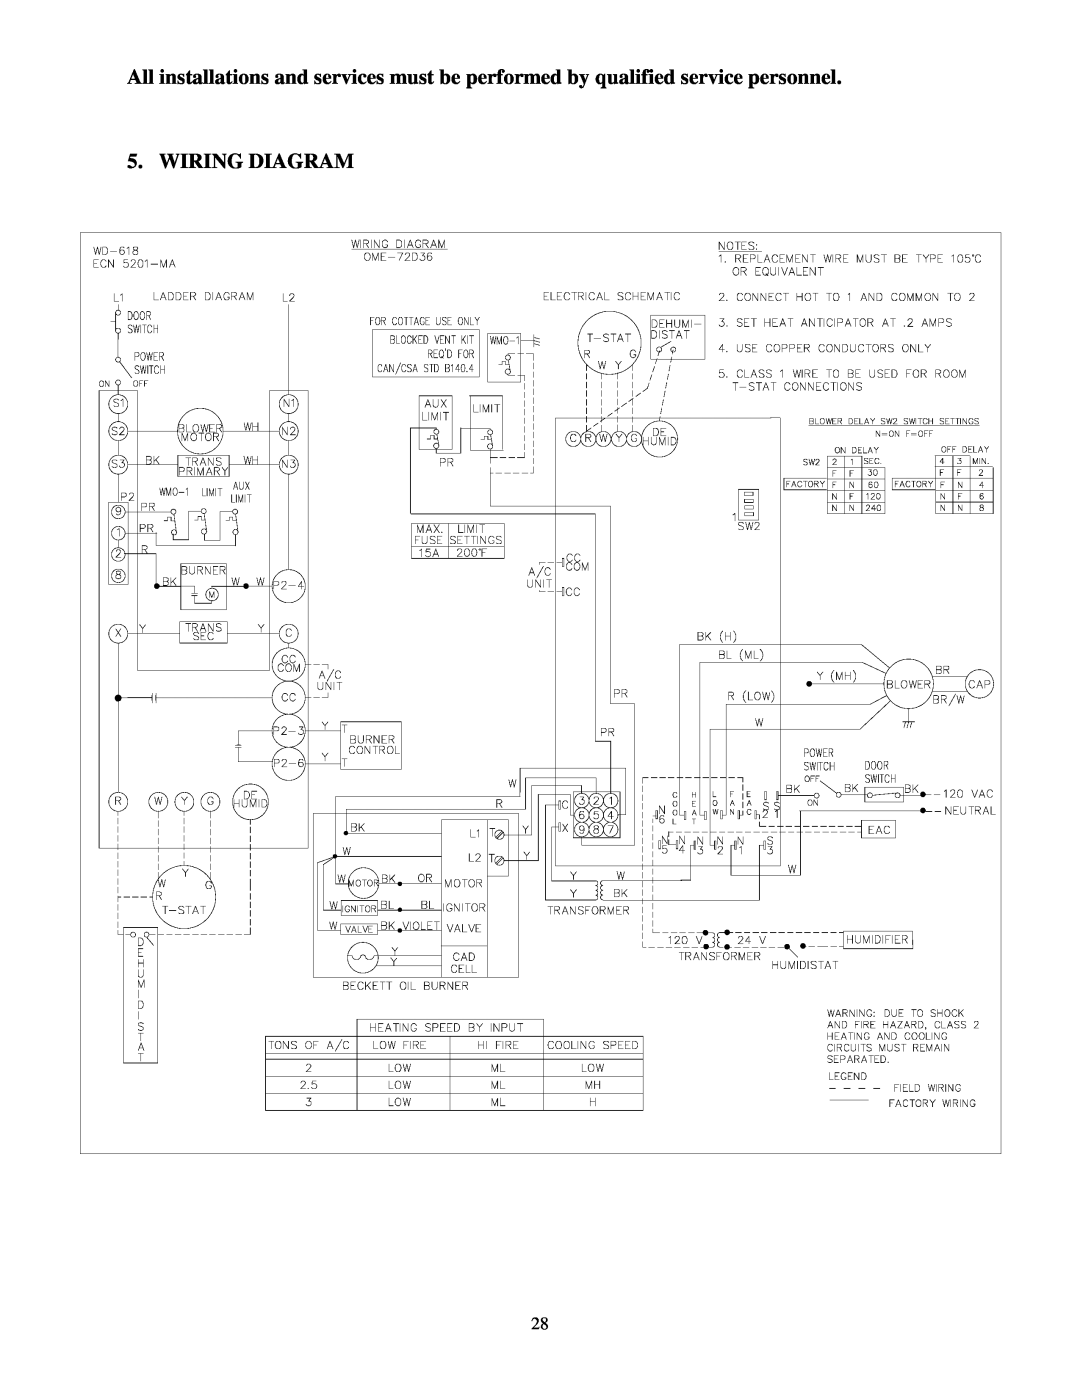 Thermo Products ome-72d36 service manual Wiring Diagram 